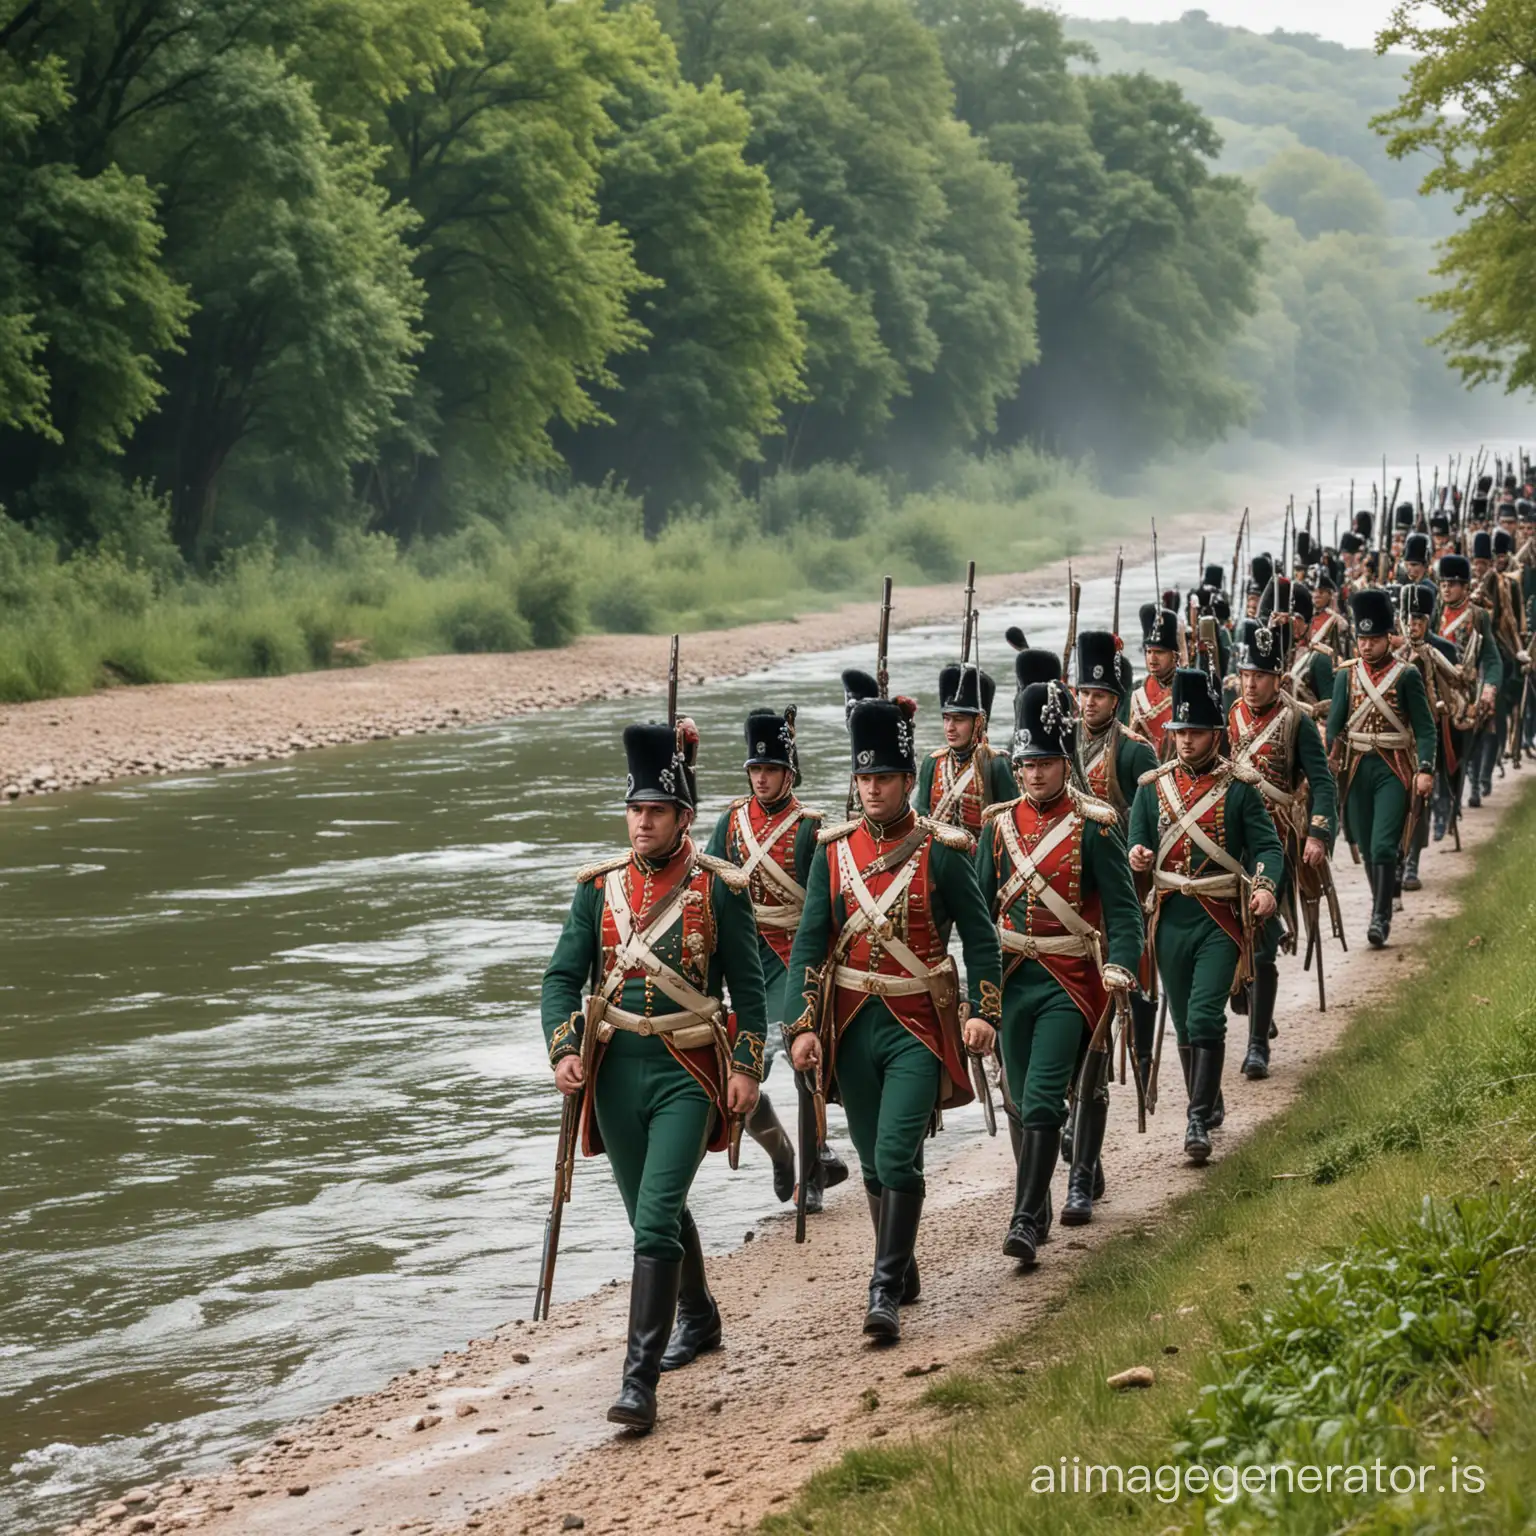 Green coated Napoleonic wars soldiers  marching along a river wearing shakos carrying muskets slung across their shoulders